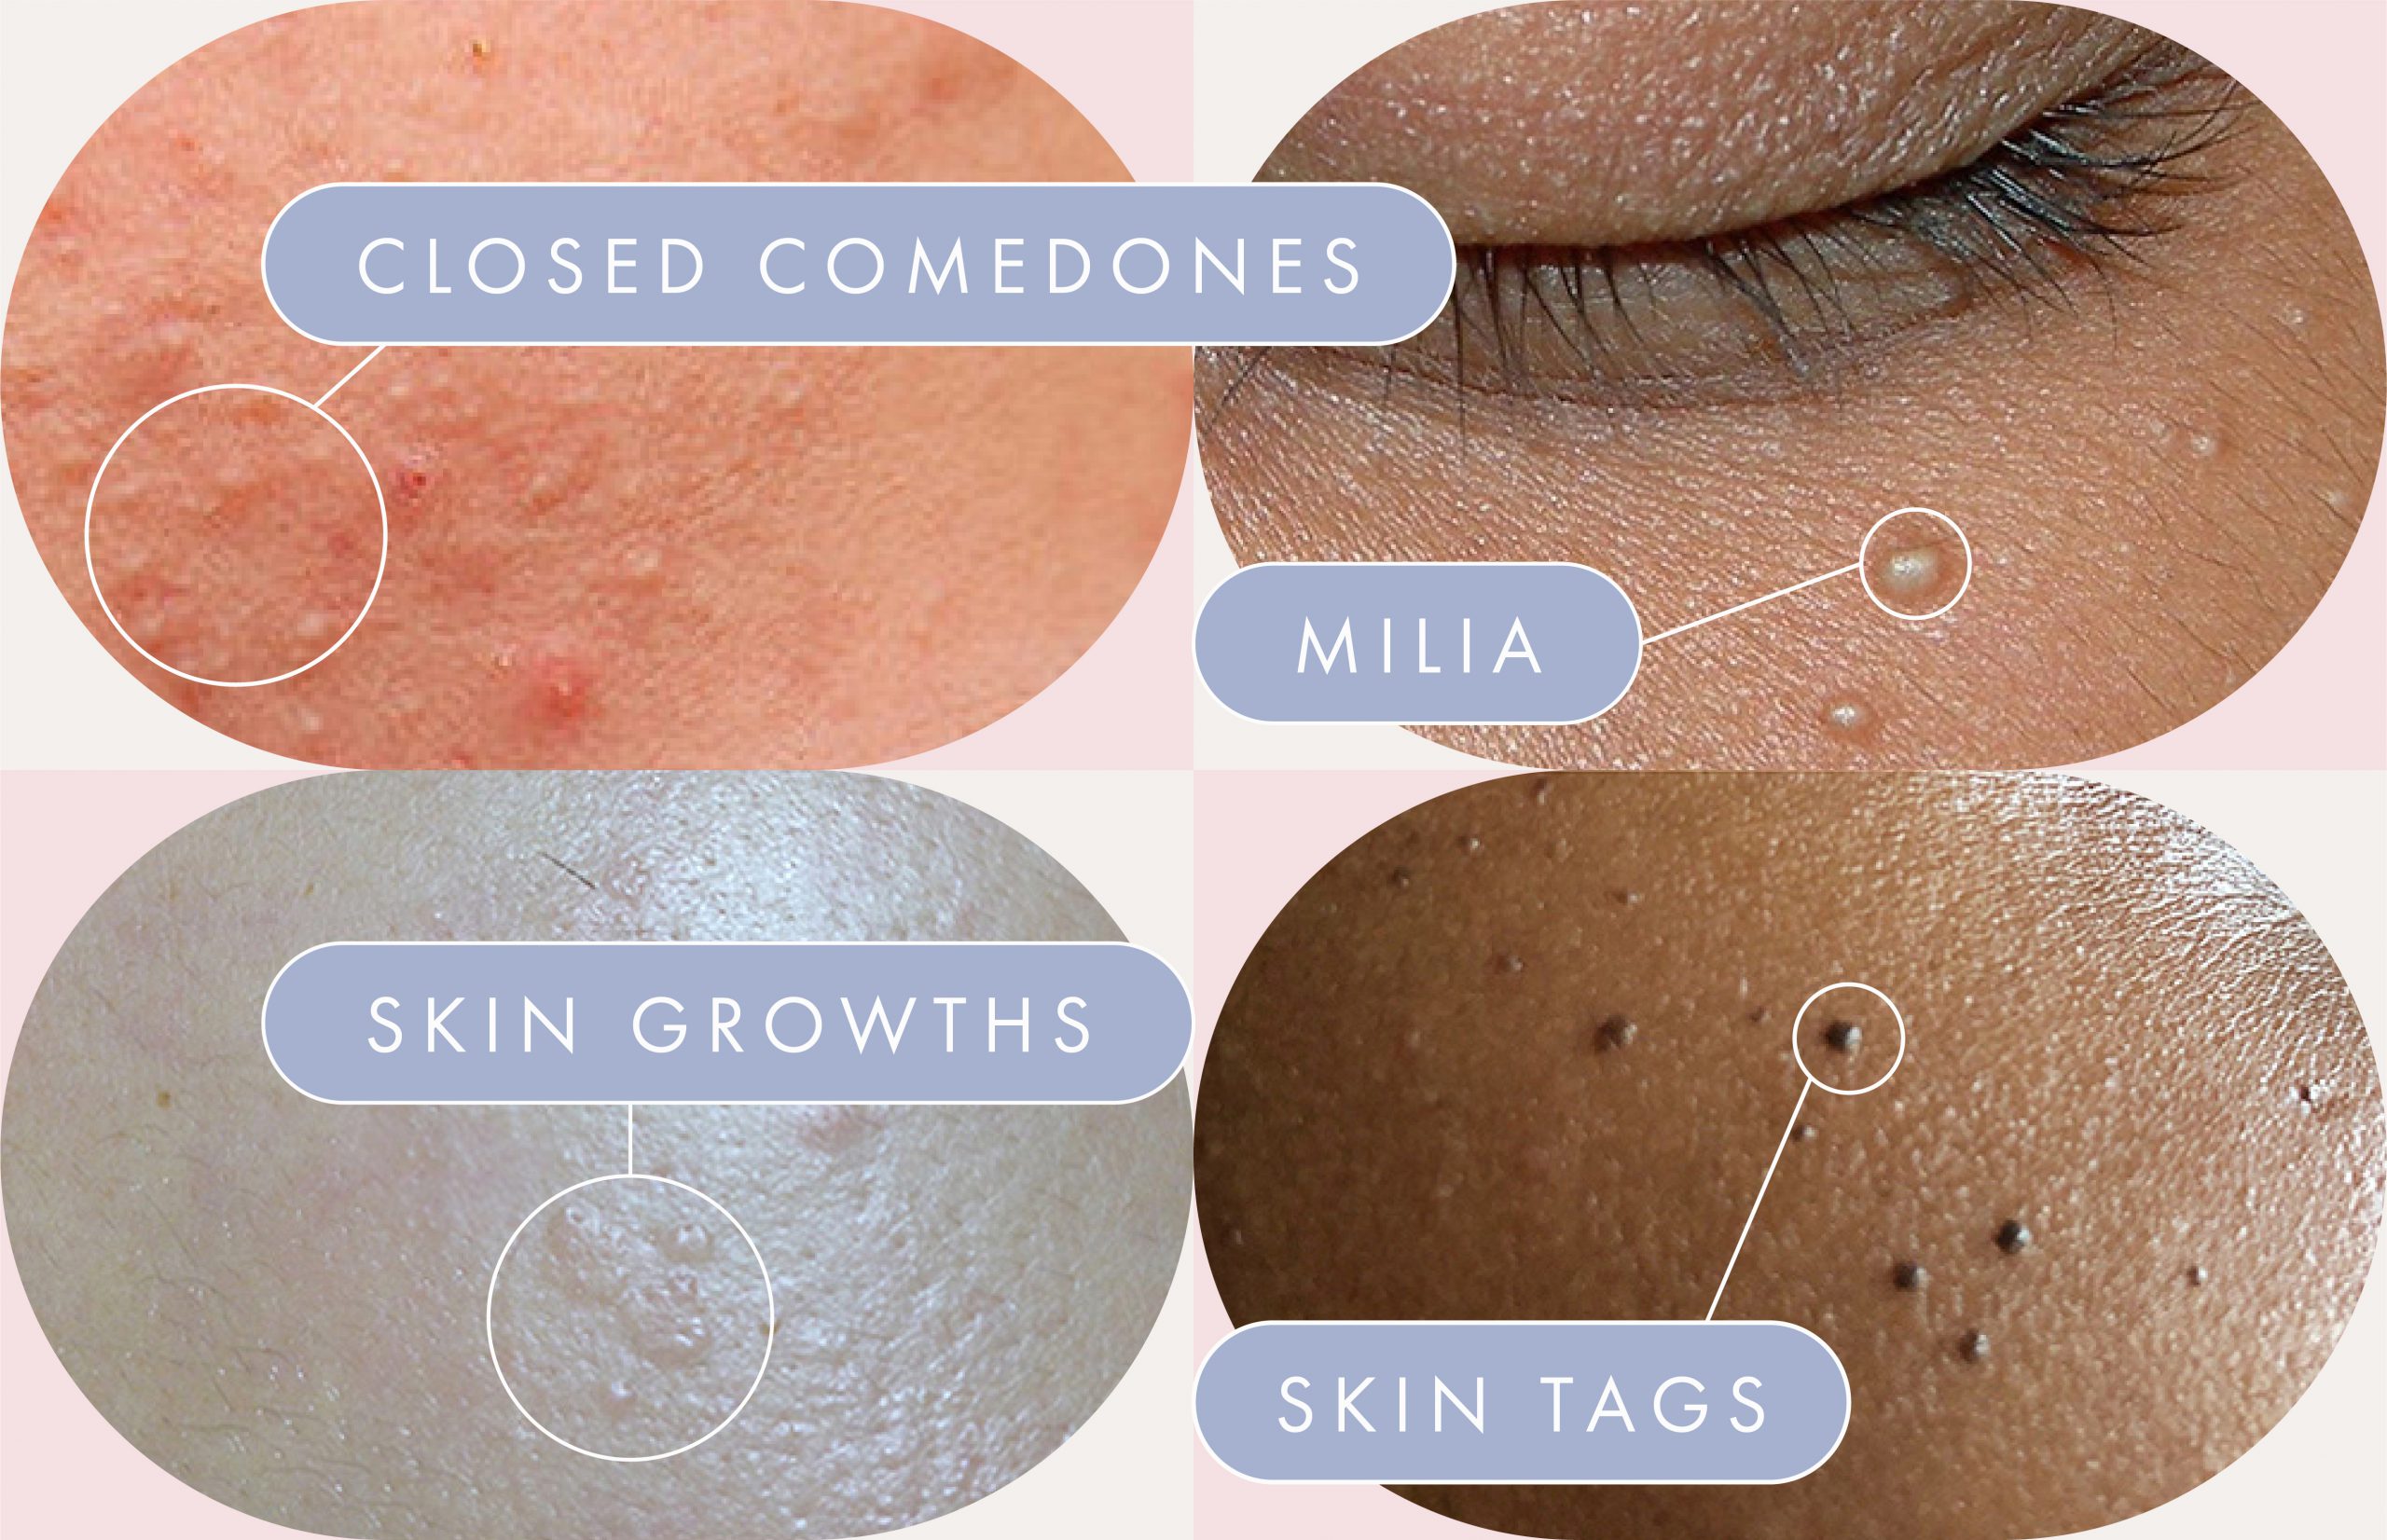 Bumps on the Skin Your Face: What They Are and What You Can Do